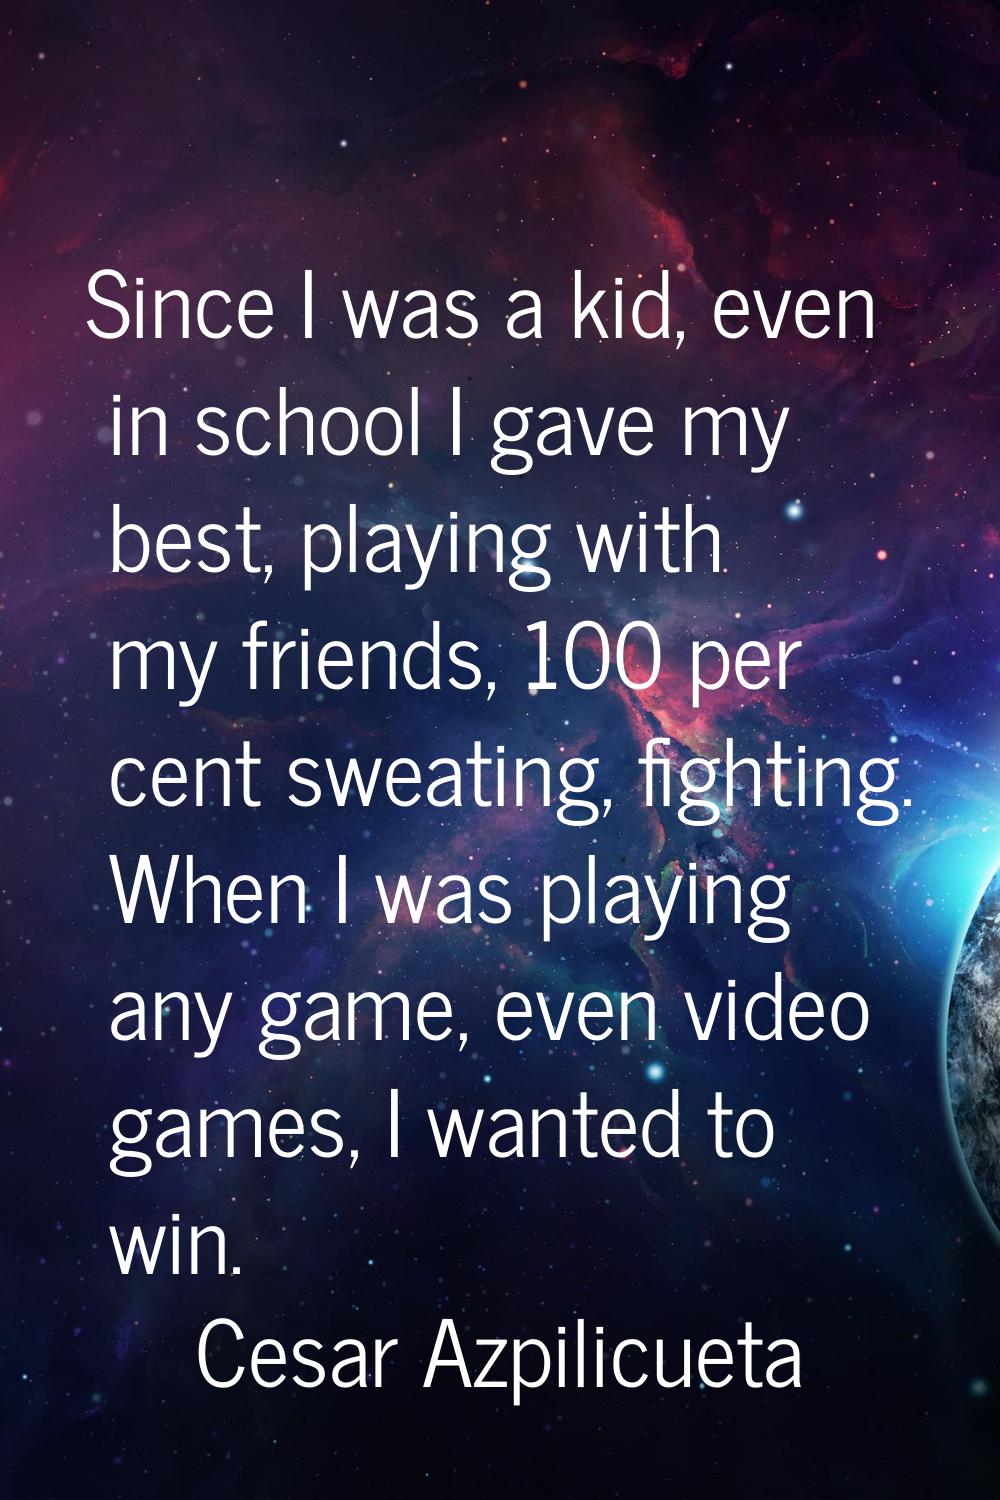 Since I was a kid, even in school I gave my best, playing with my friends, 100 per cent sweating, f